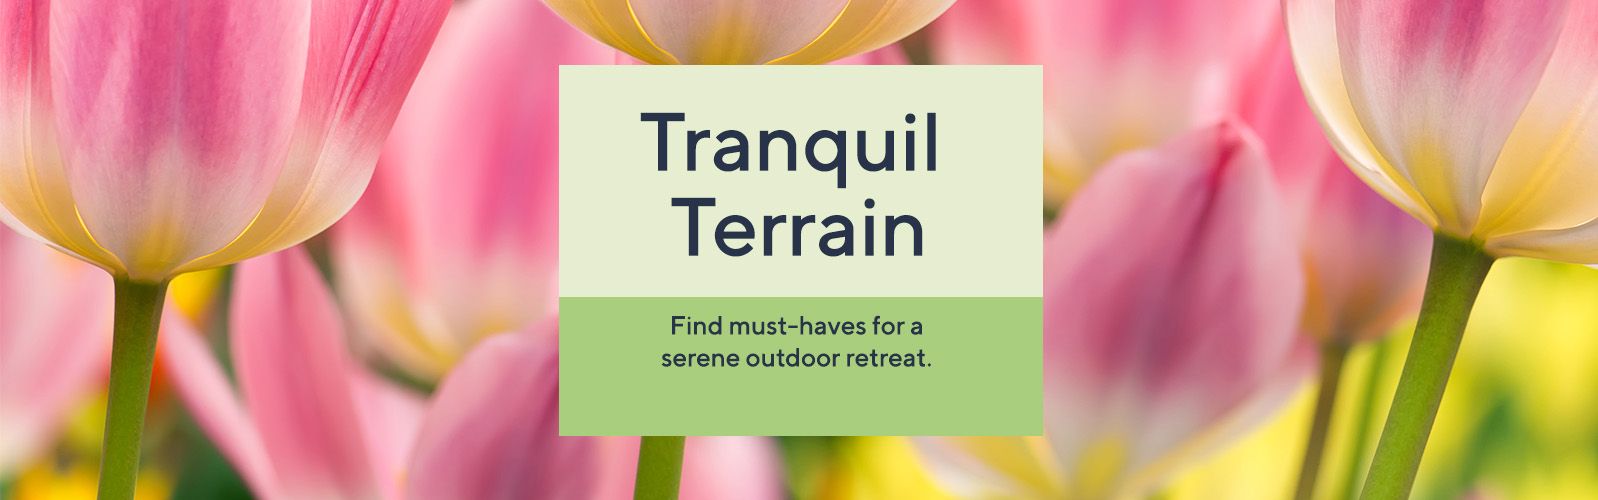 Tranquil Terrain - Find must-haves for a serene outdoor retreat.  